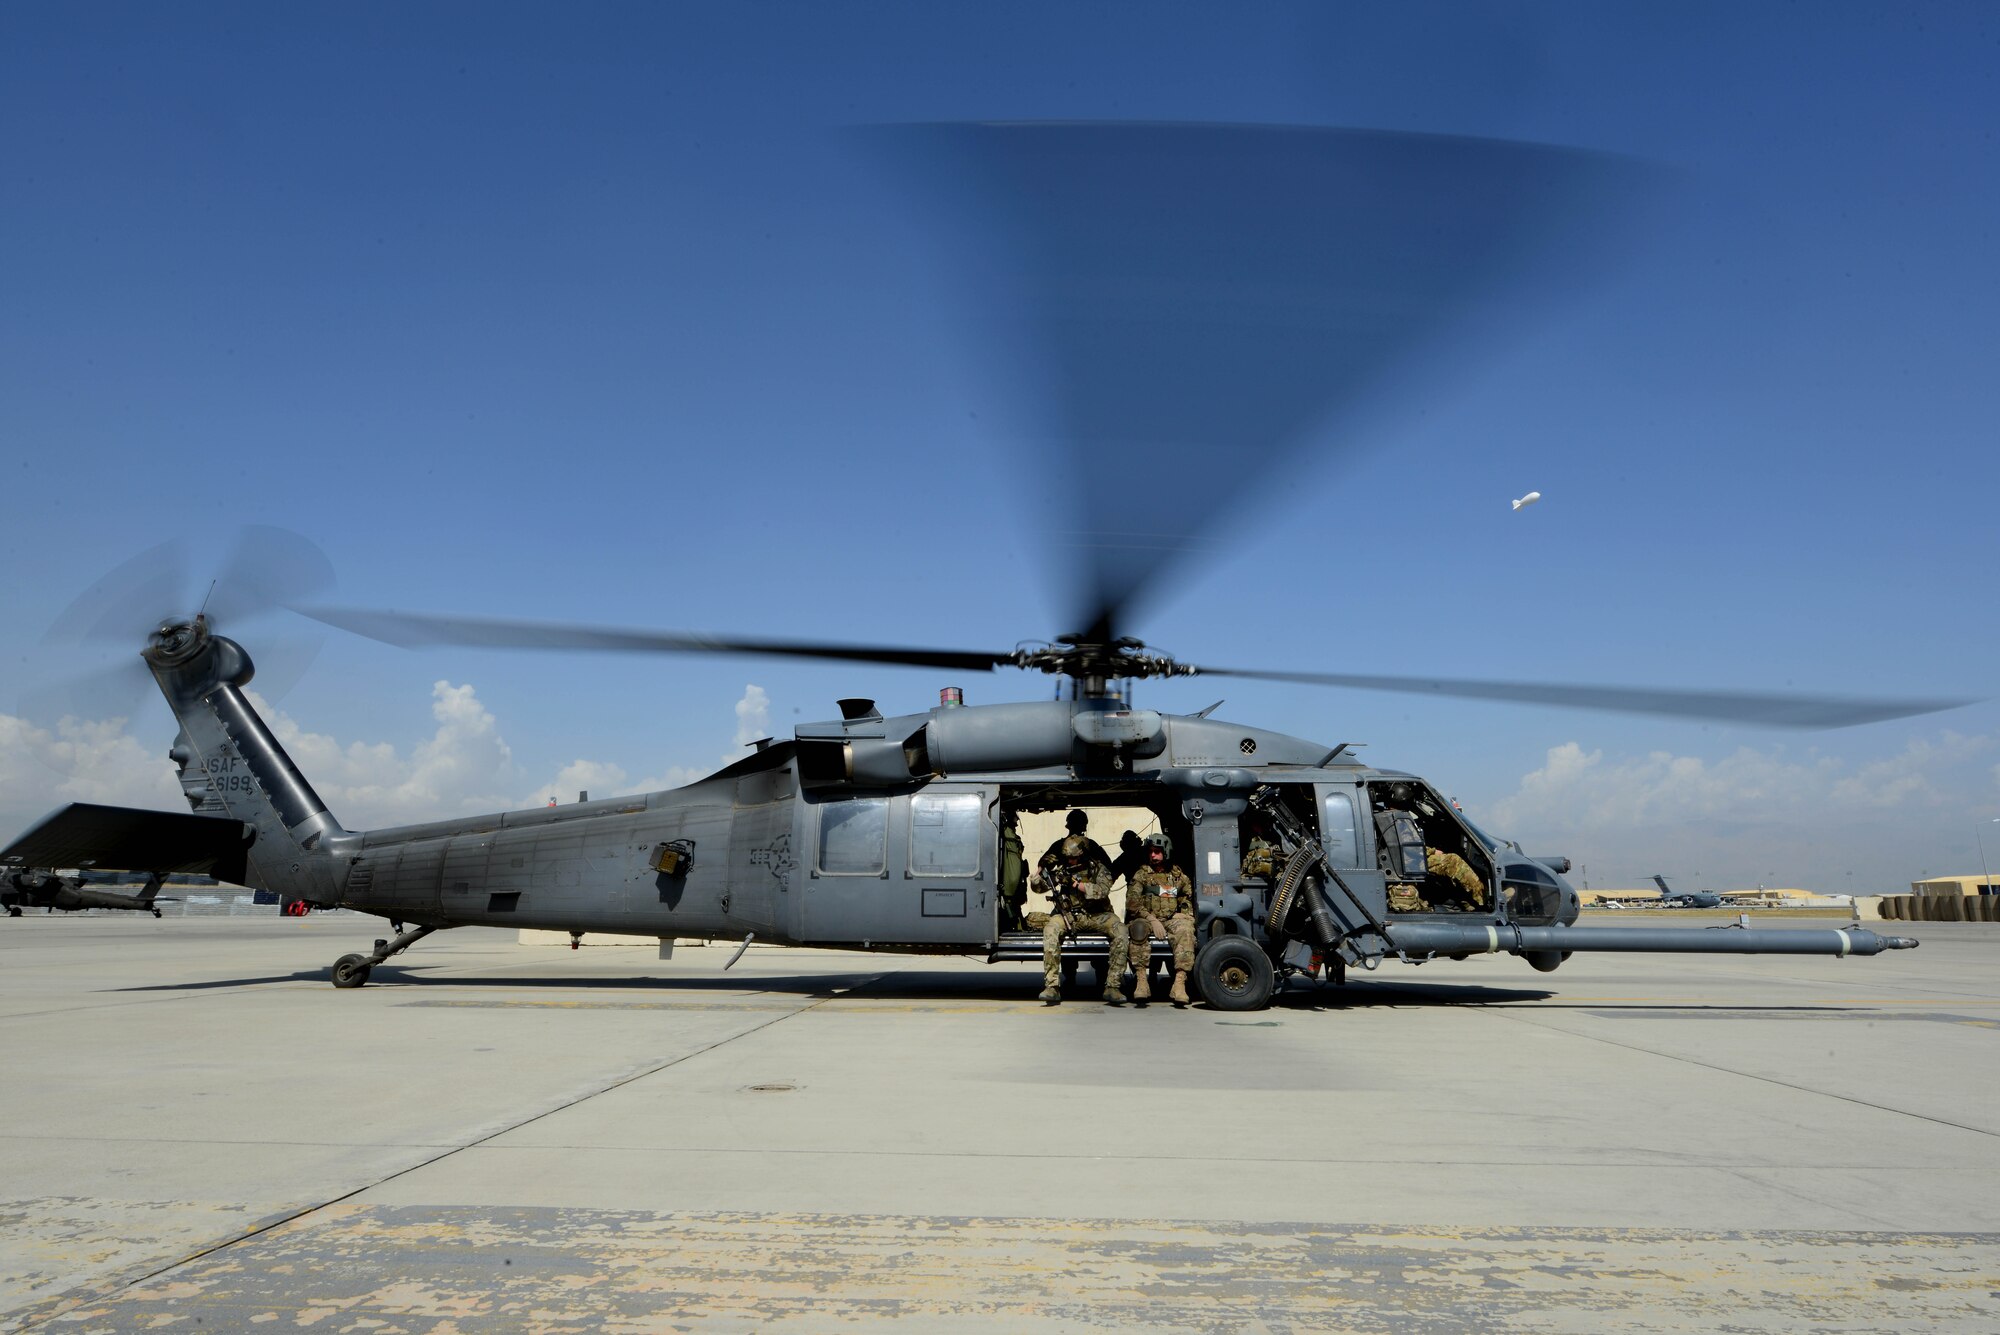 A U.S. Air Force HH-60 Pavehawk helicopter prepares for take off at Bagram Airfield, Afghanistan Sept. 8, 2014.  Deployed service members help operate 46 different types of aircraft in-and-out of the buisiest single runway airfield in the Department of Defense. (U.S. Air Force photo by Staff Sgt. Evelyn Chavez/Released)